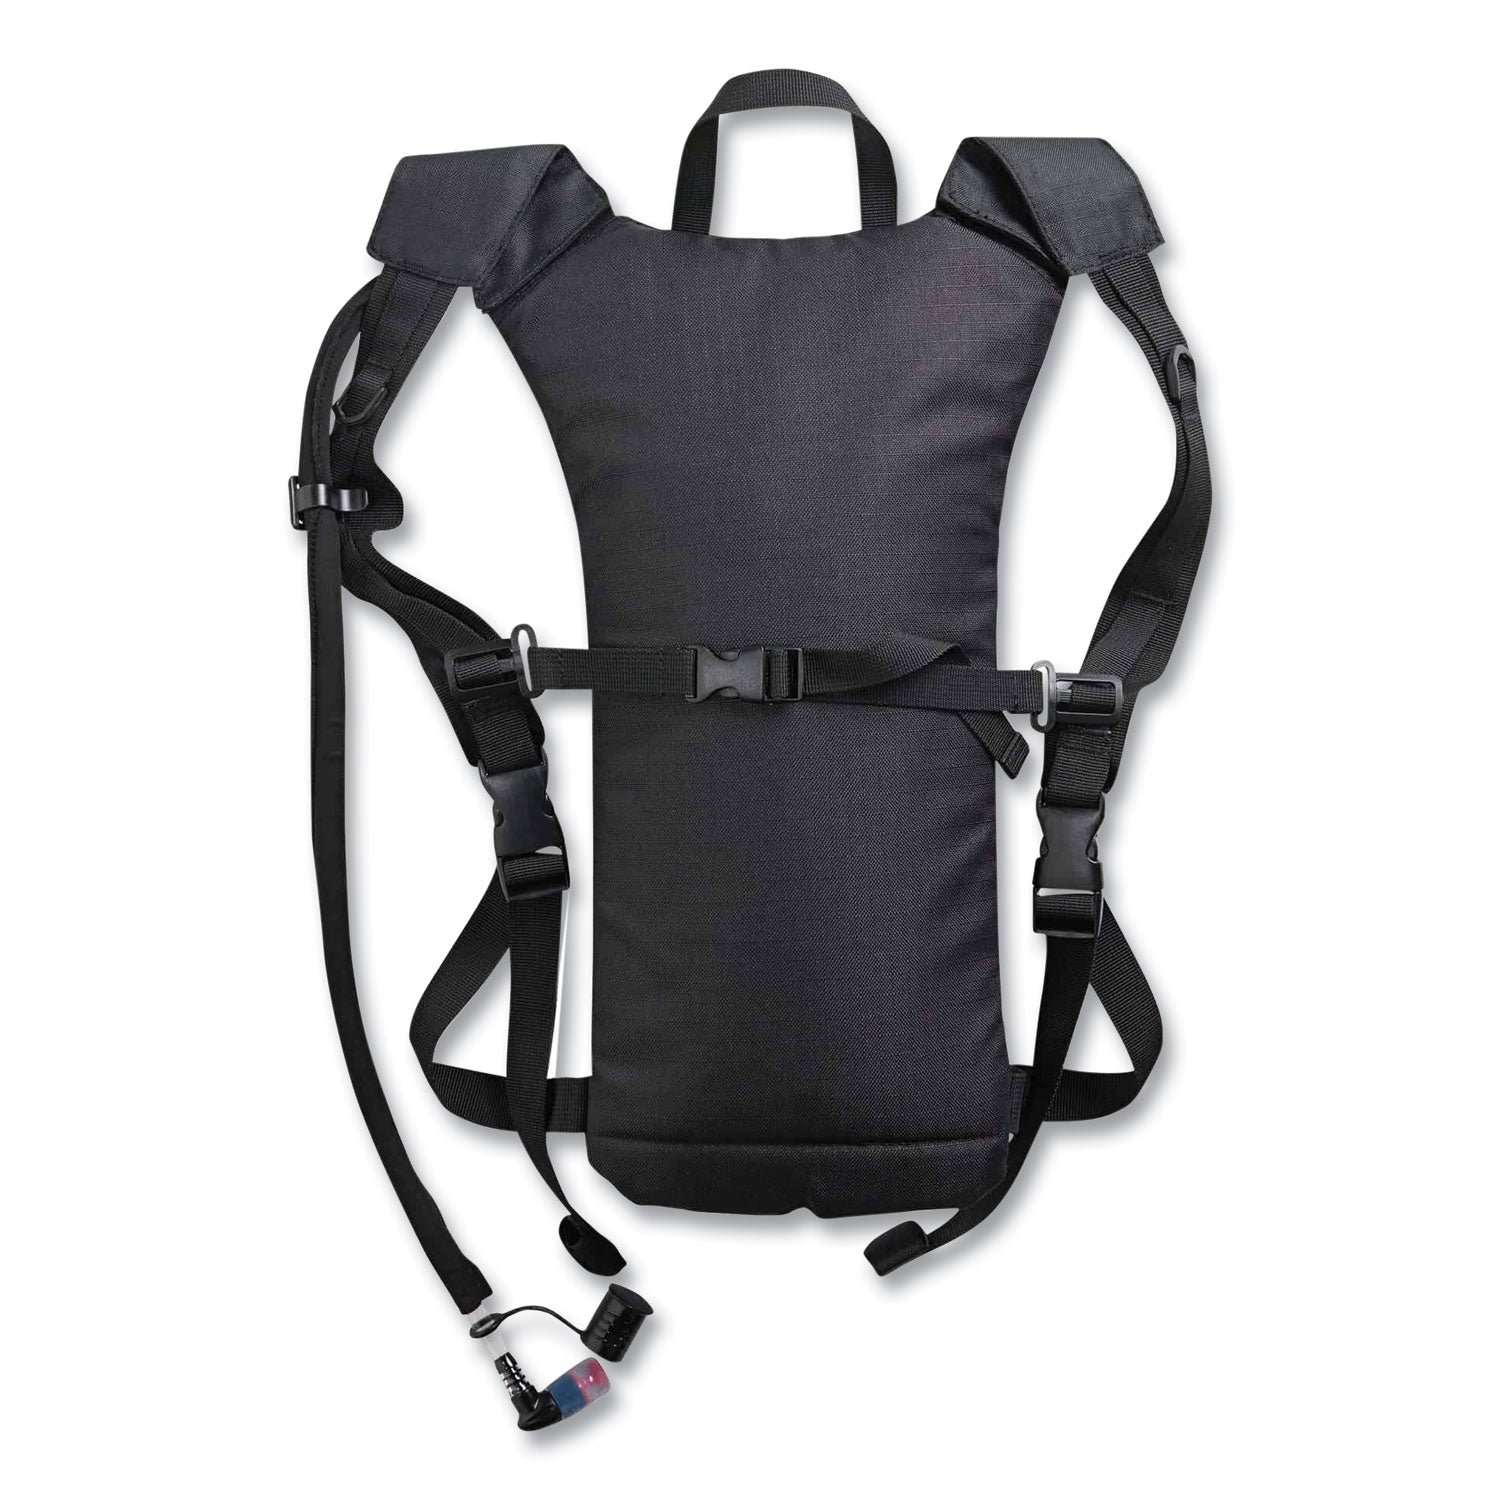 chill-its-5155-low-profile-hydration-pack-2-l-black-ships-in-1-3-business-days_ego13155 - 3